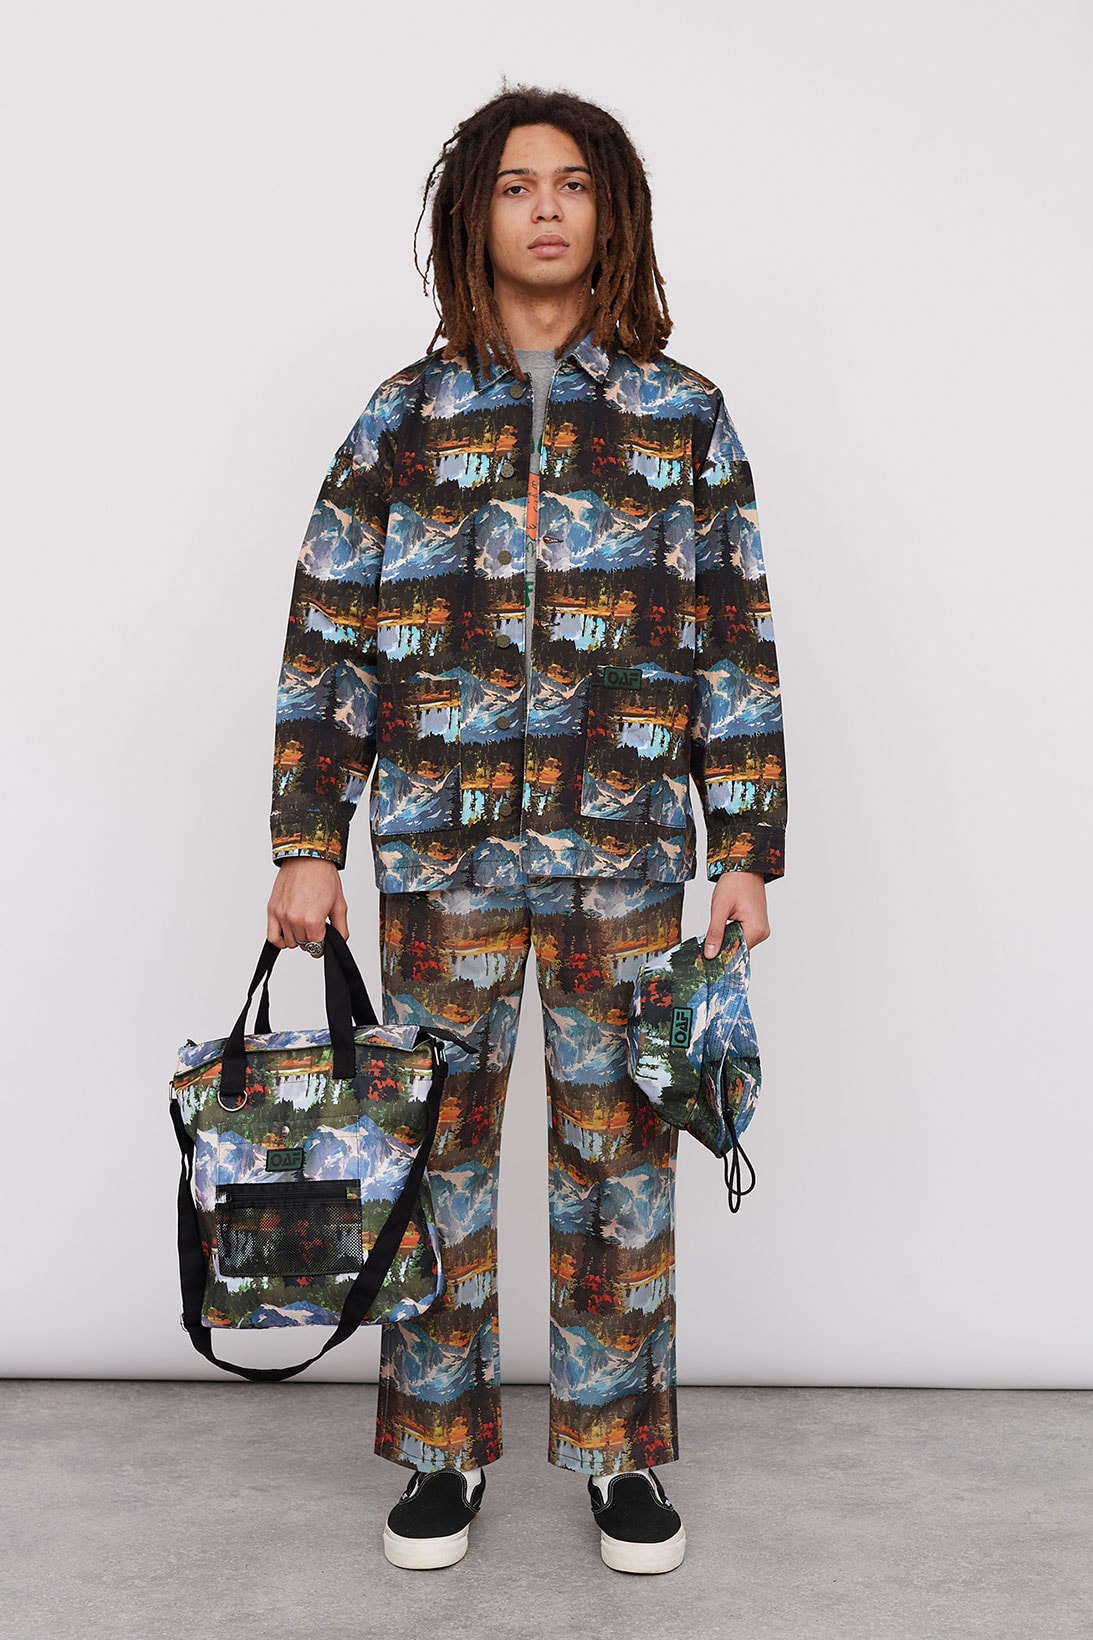 Lazy Oaf Take A Hike Outdoor Hiking Collection Lookbook Pattern Print Jacket Pants Backpack Bucket Hat